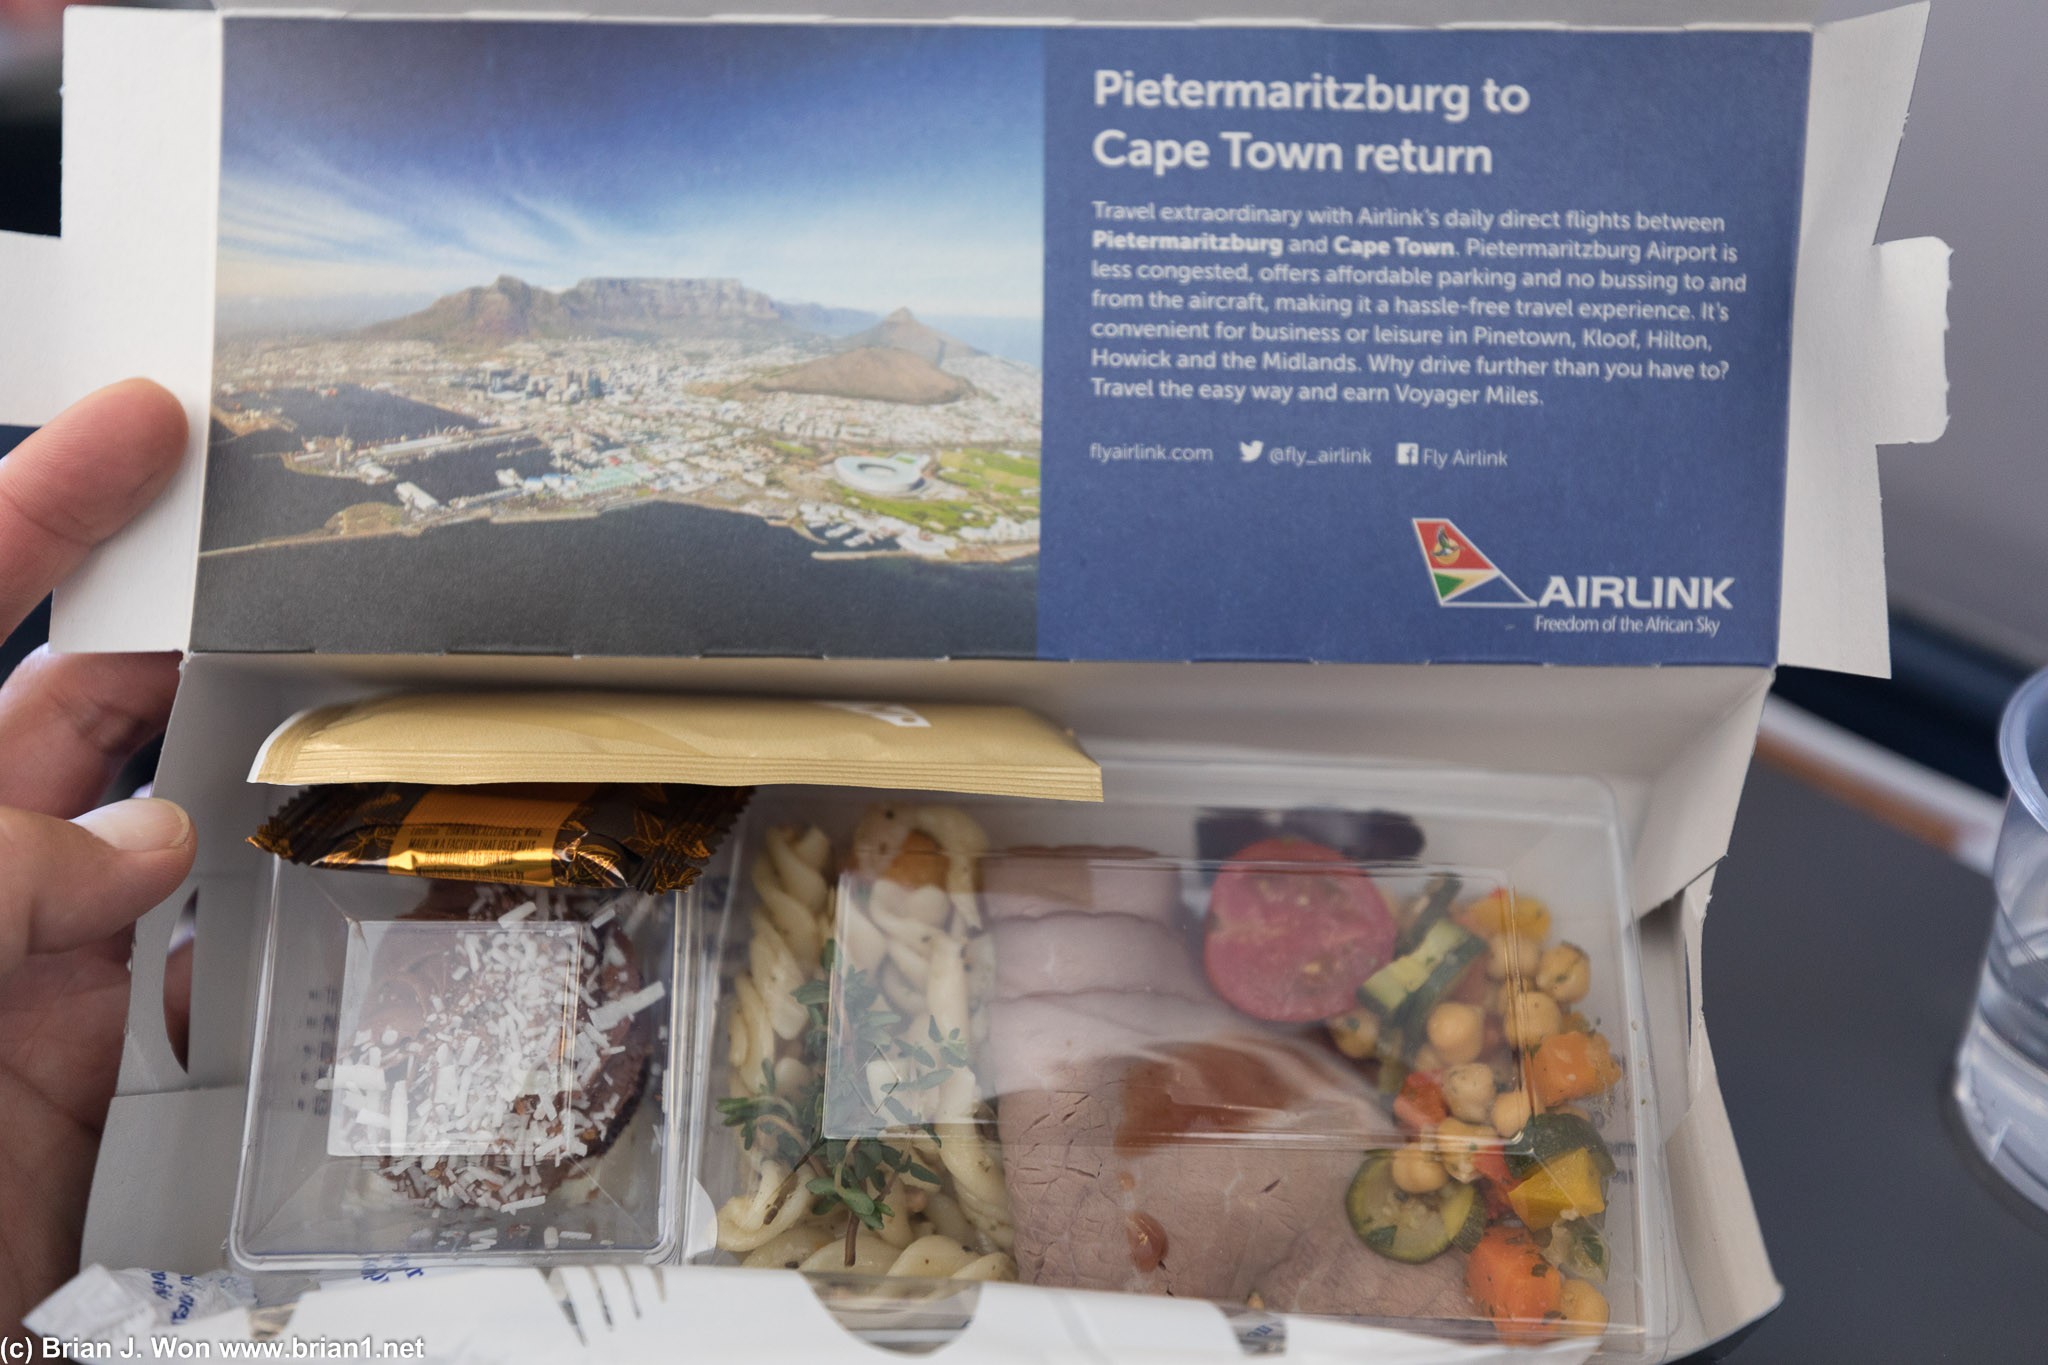 South African Airways feeds you even on a 2 hour flight?!?